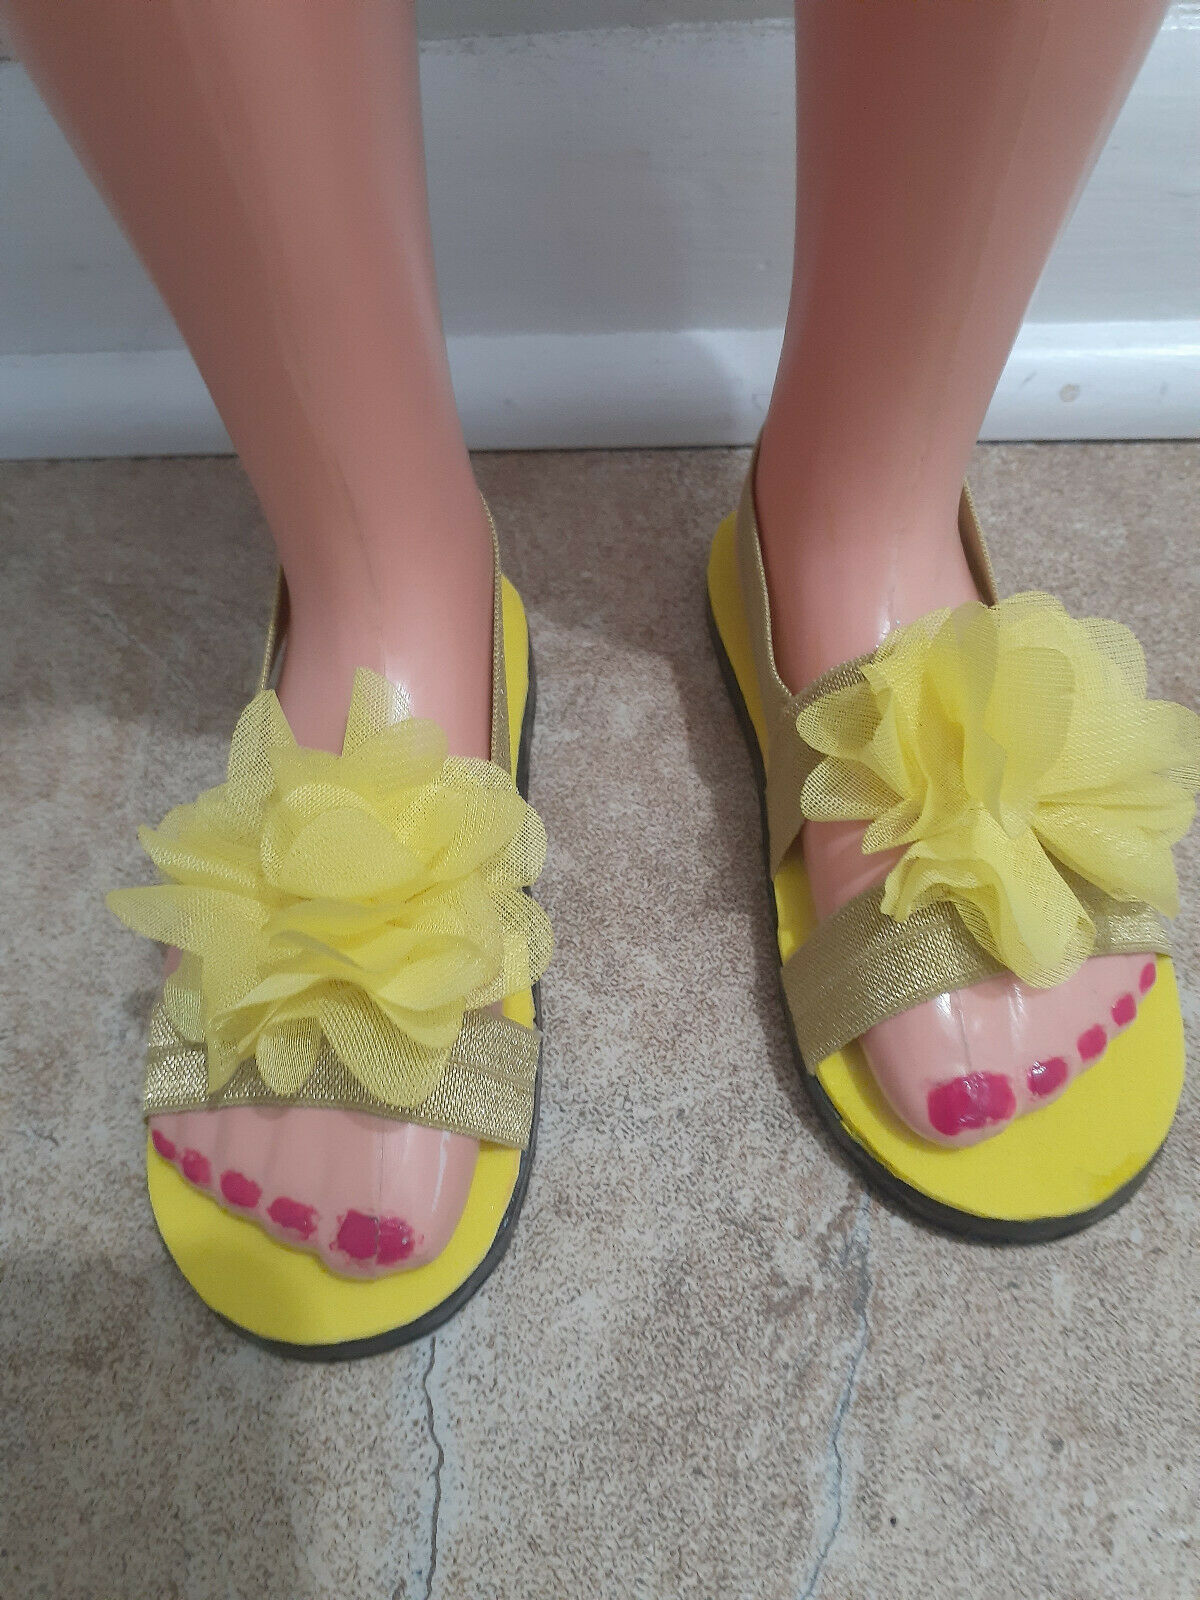 36" My Size Barbie Yelow Sandals Shoes